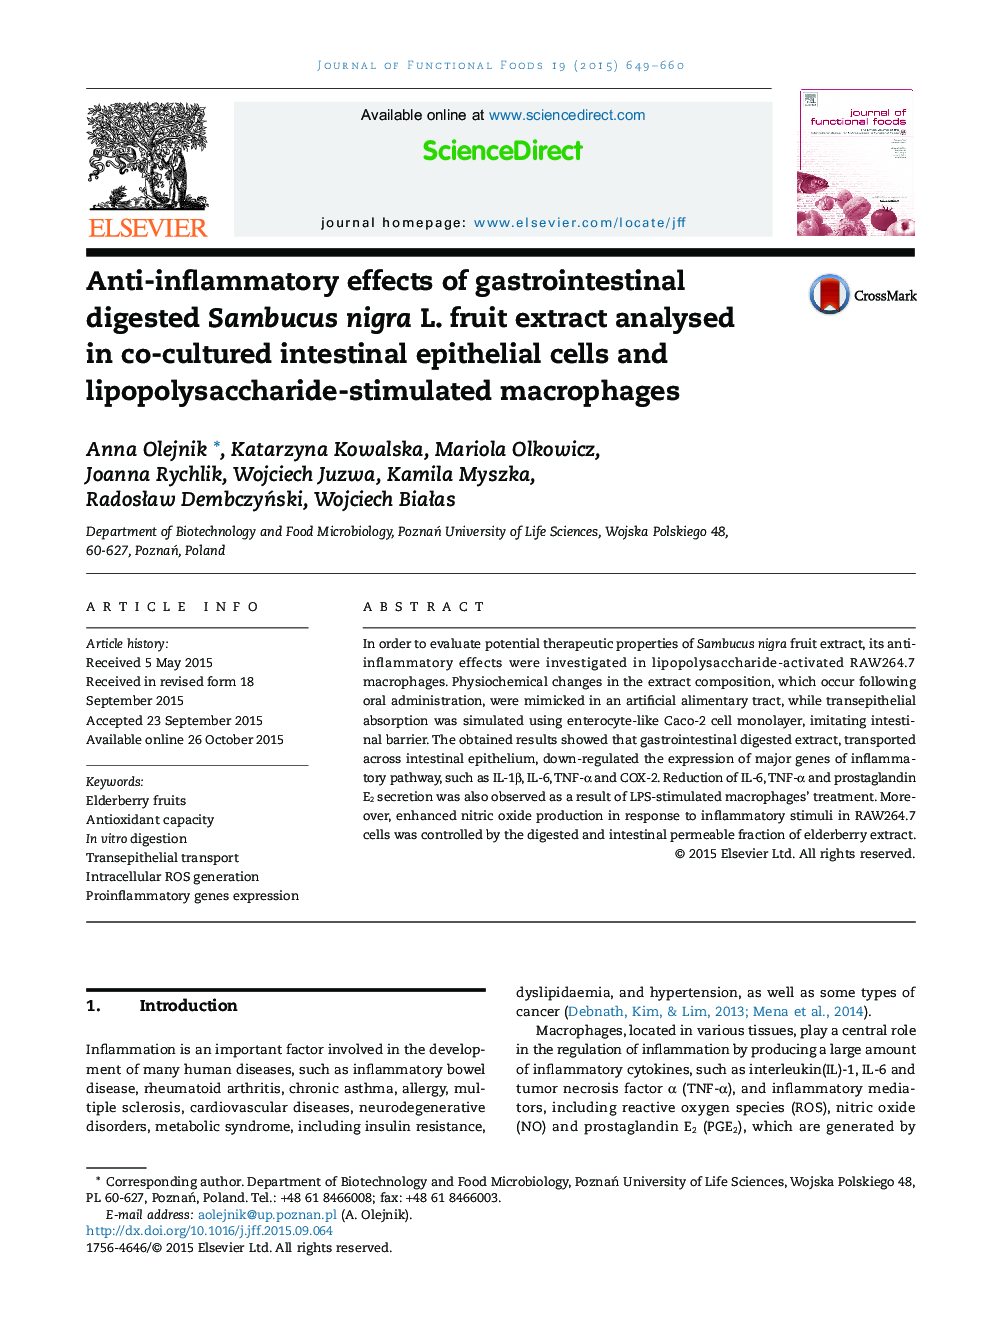 Anti-inflammatory effects of gastrointestinal digested Sambucus nigra L. fruit extract analysed in co-cultured intestinal epithelial cells and lipopolysaccharide-stimulated macrophages